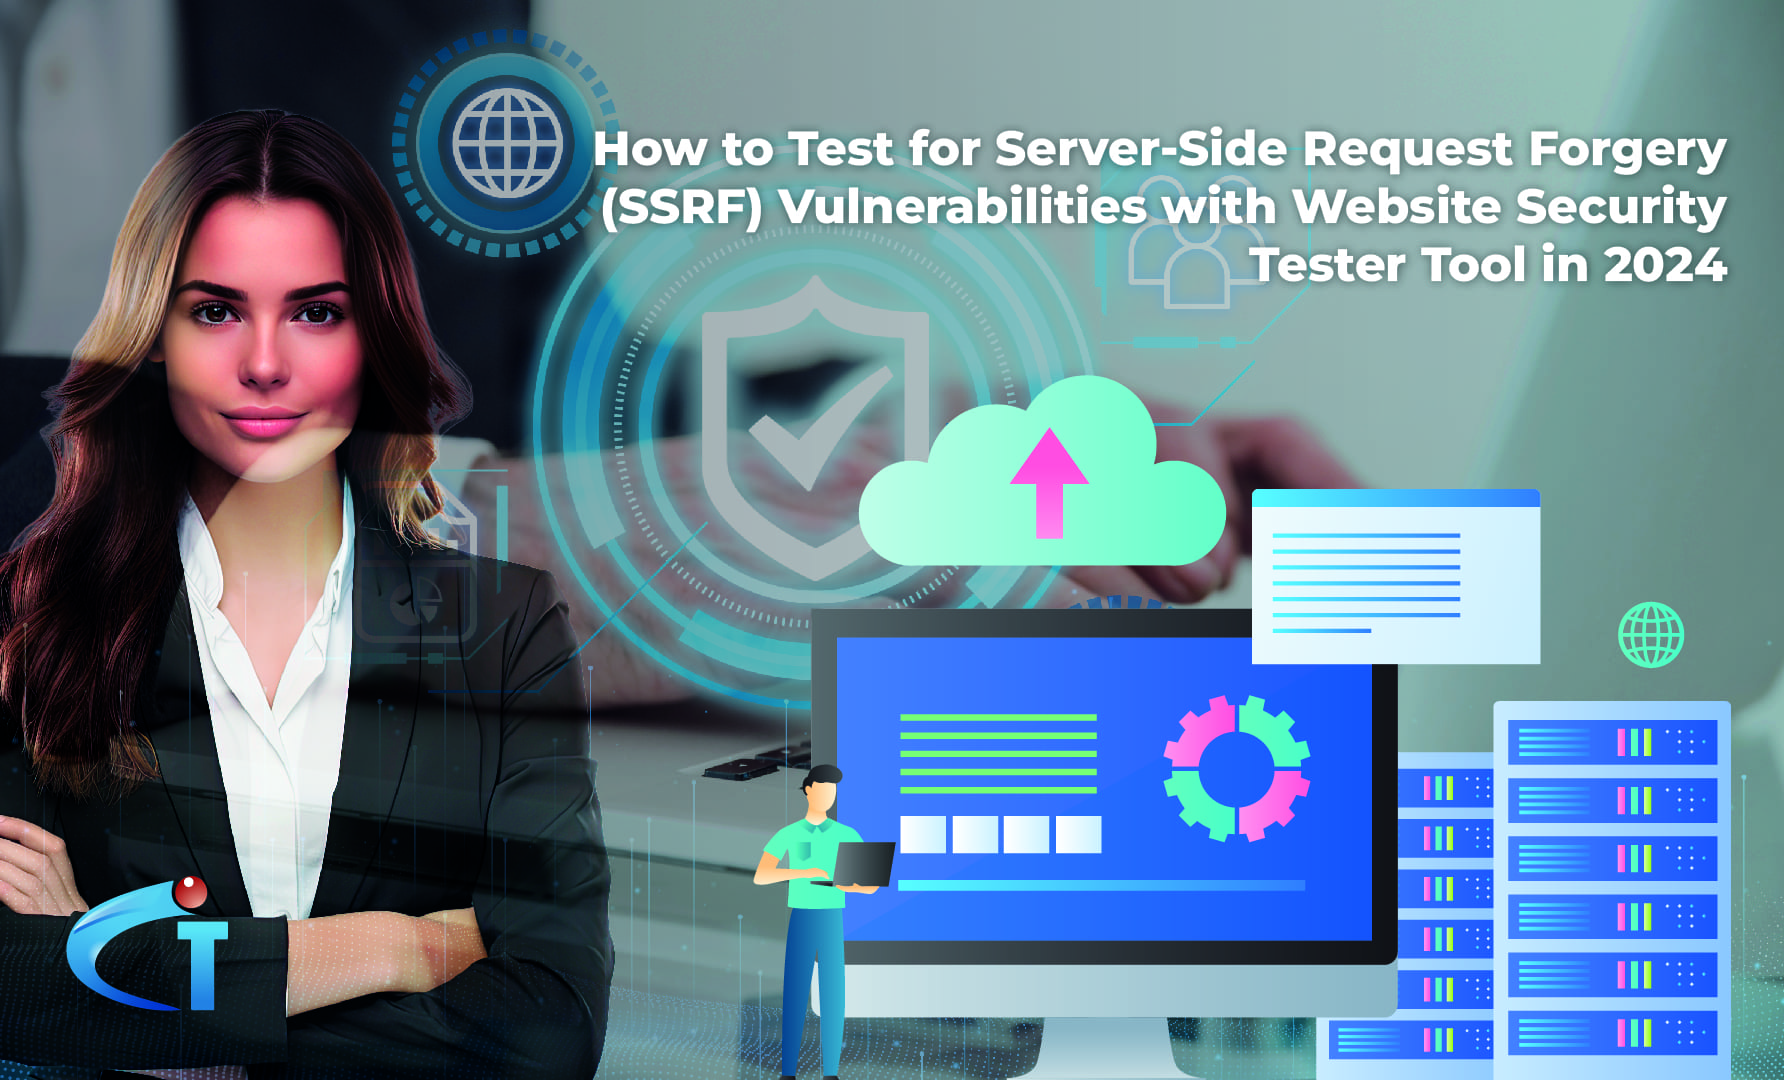 Test for Server-Side Vulnerabilities with Website Security Tester